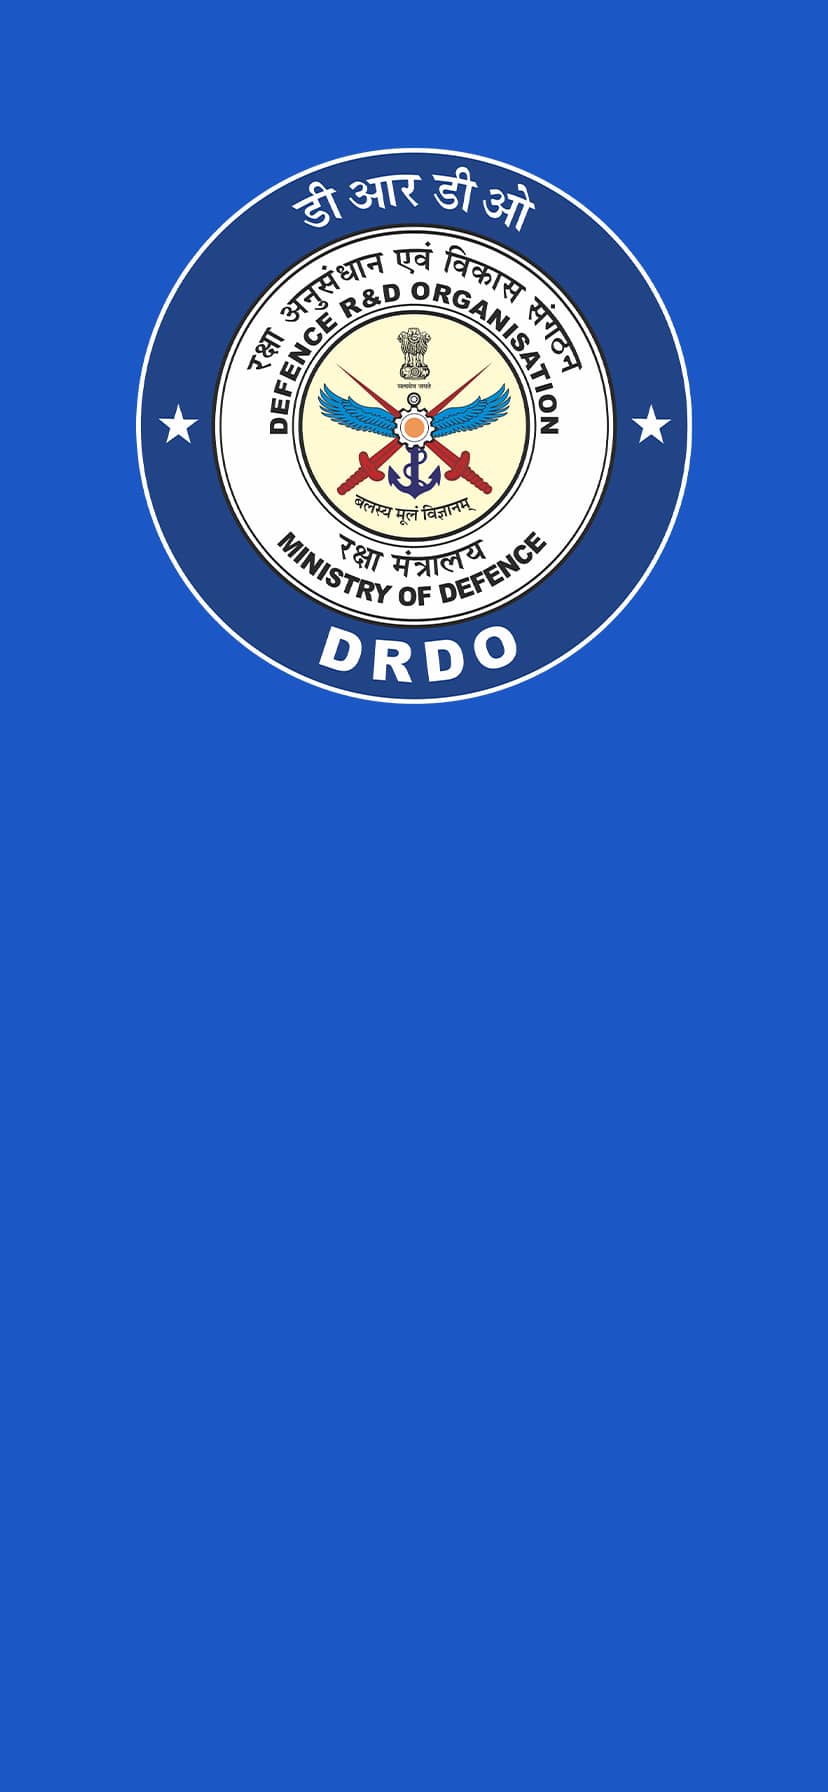 Labs under DRDO Archives - iLovePhD